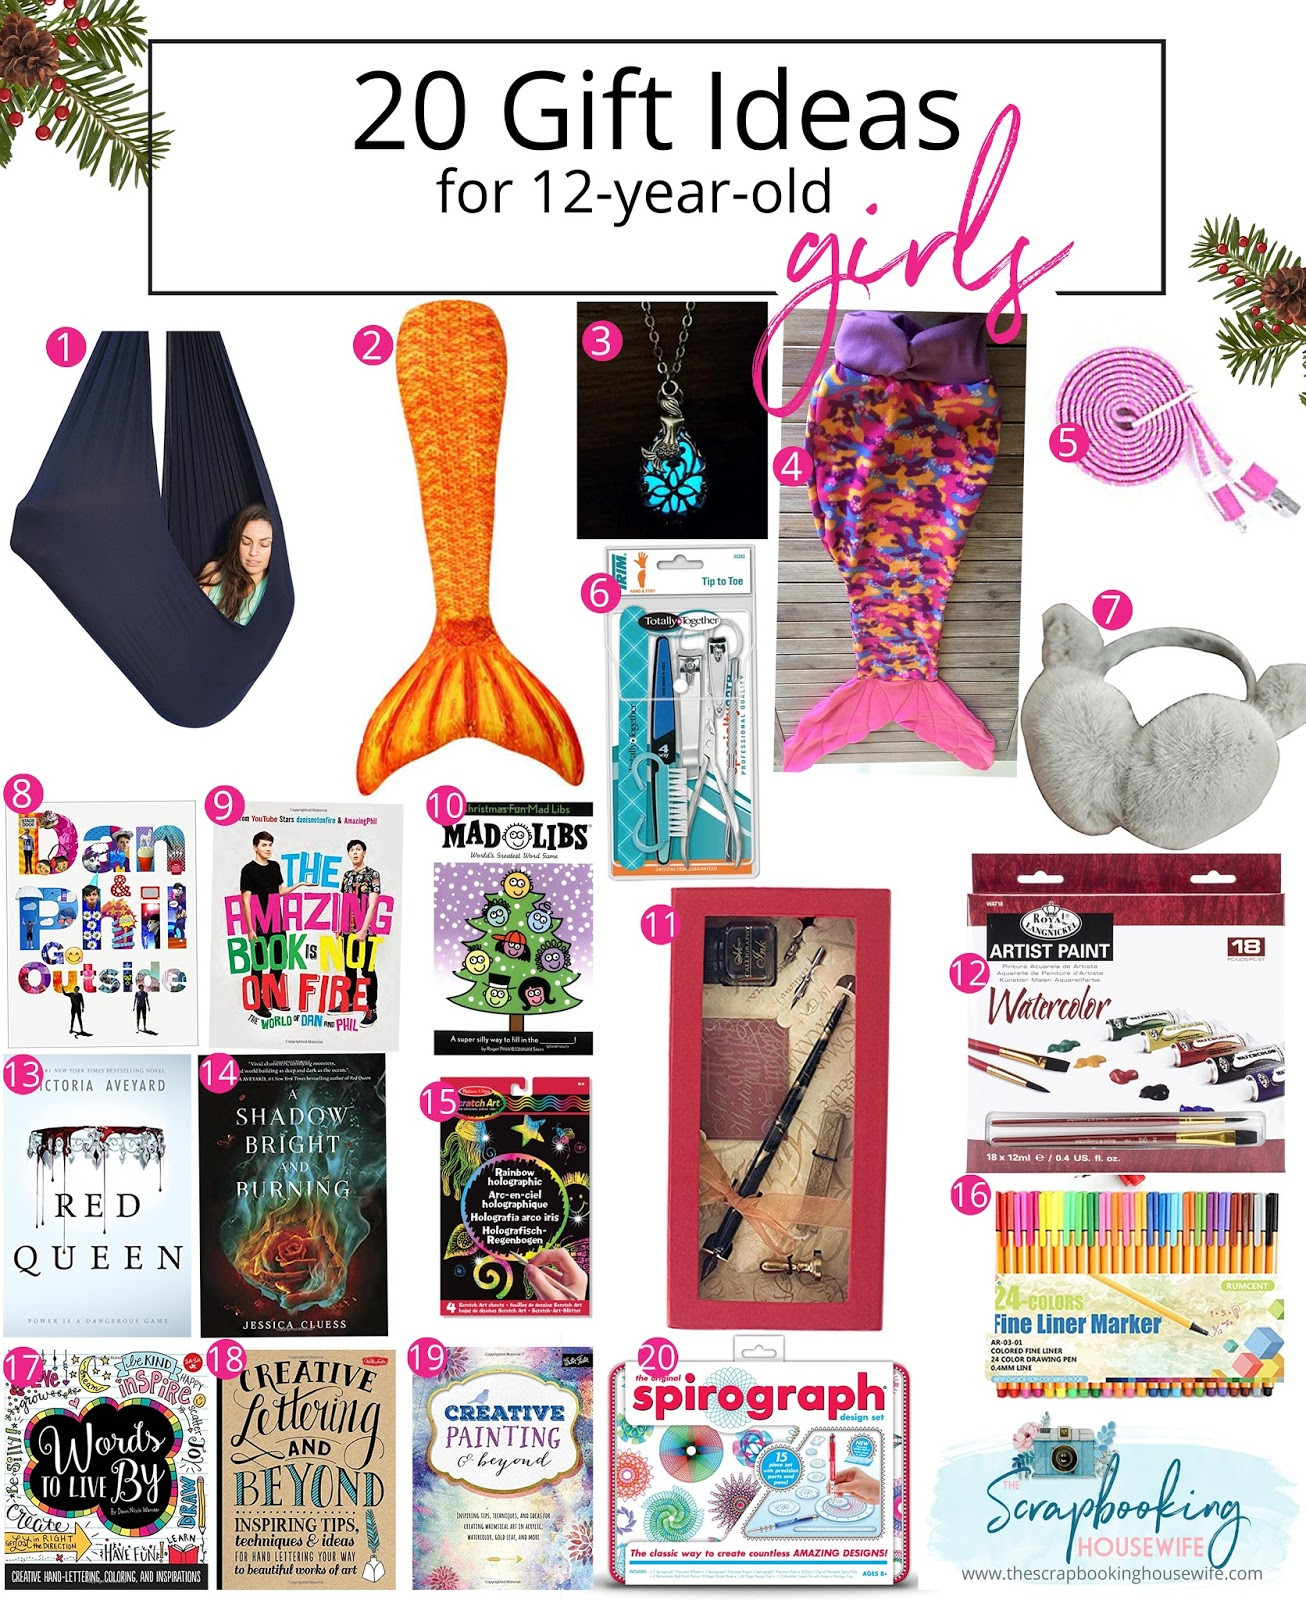 Christmas Gift Ideas For 11 Year Old Daughter
 Ellabella Designs 13 GIFT IDEAS FOR TODDLERS